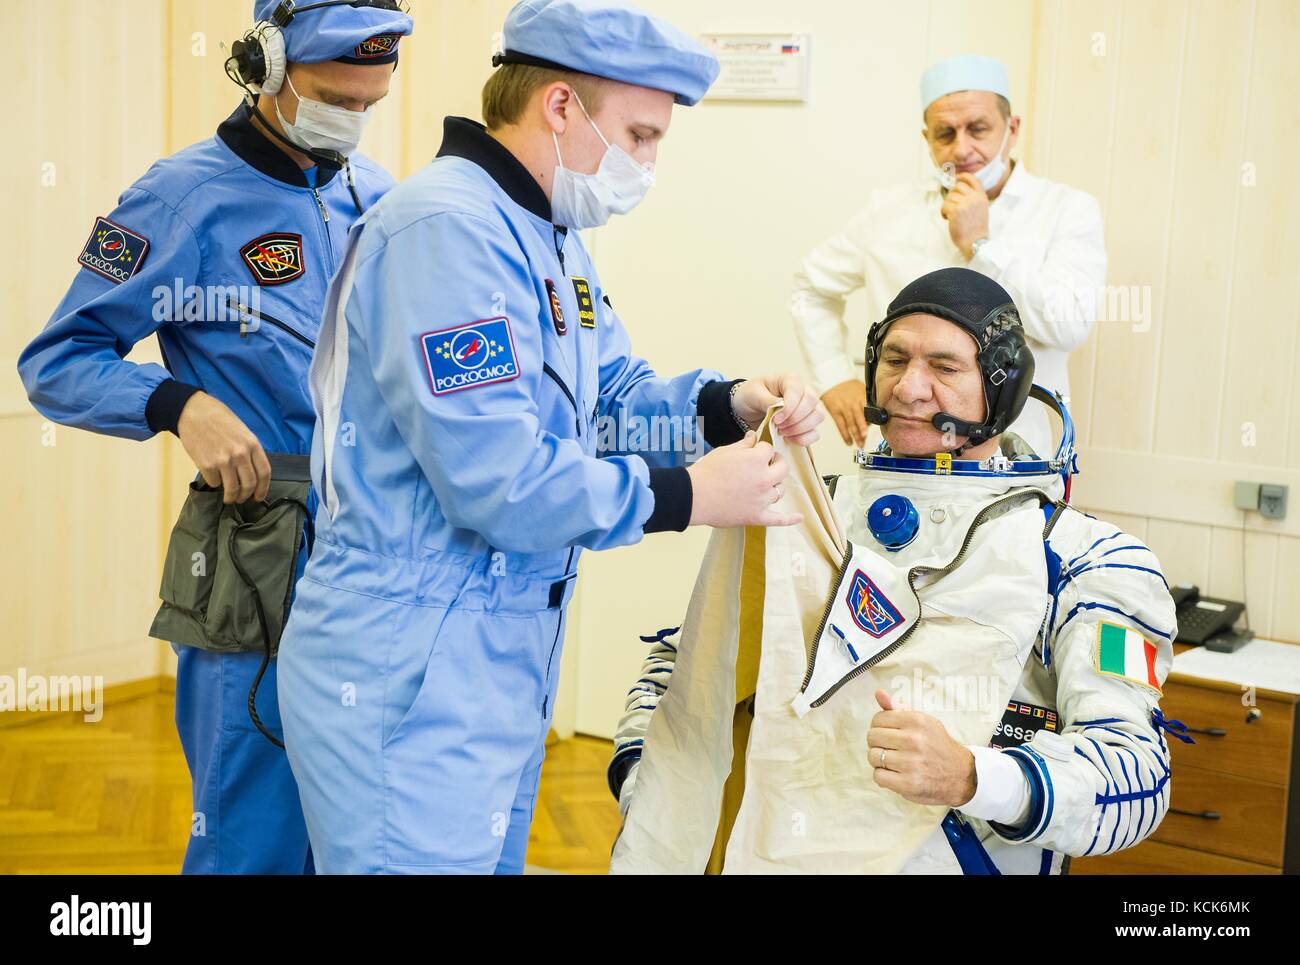 NASA International Space Station Expedition 52 prime crew member Italian astronaut Paolo Nespoli of the European Space Agency is helped into his Sokol spacesuit in preparation for the Soyuz MS-05 launch at the Baikonur Cosmodrome July 28, 2017 in Baikonur, Kazakhstan.  (photo by Andrey Shelepin  via Planetpix) Stock Photo